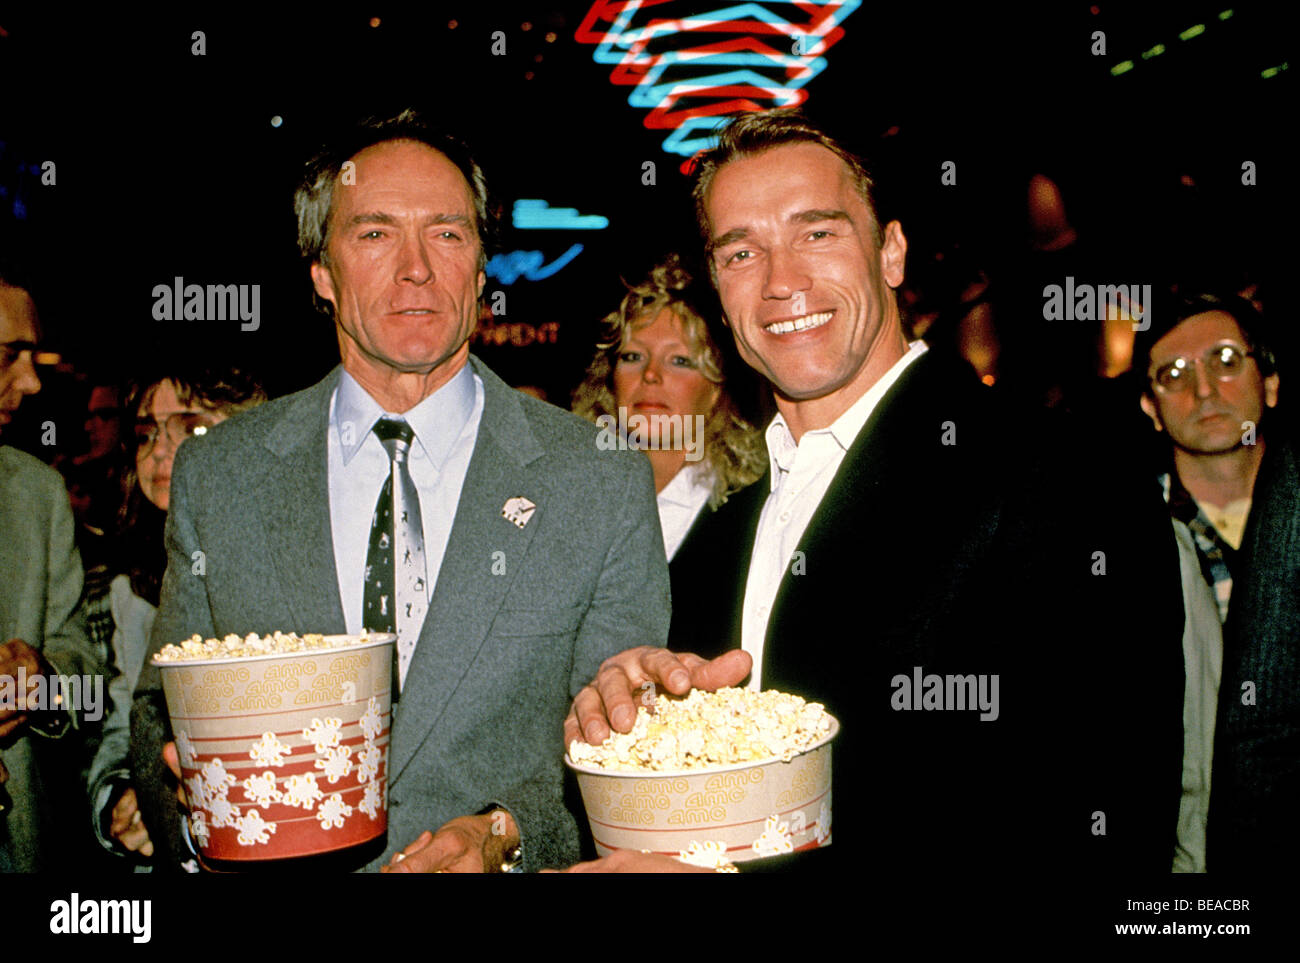 CLINT EASTWOOD at left and  Arnold Schwarznegger  at a film premiere Stock Photo